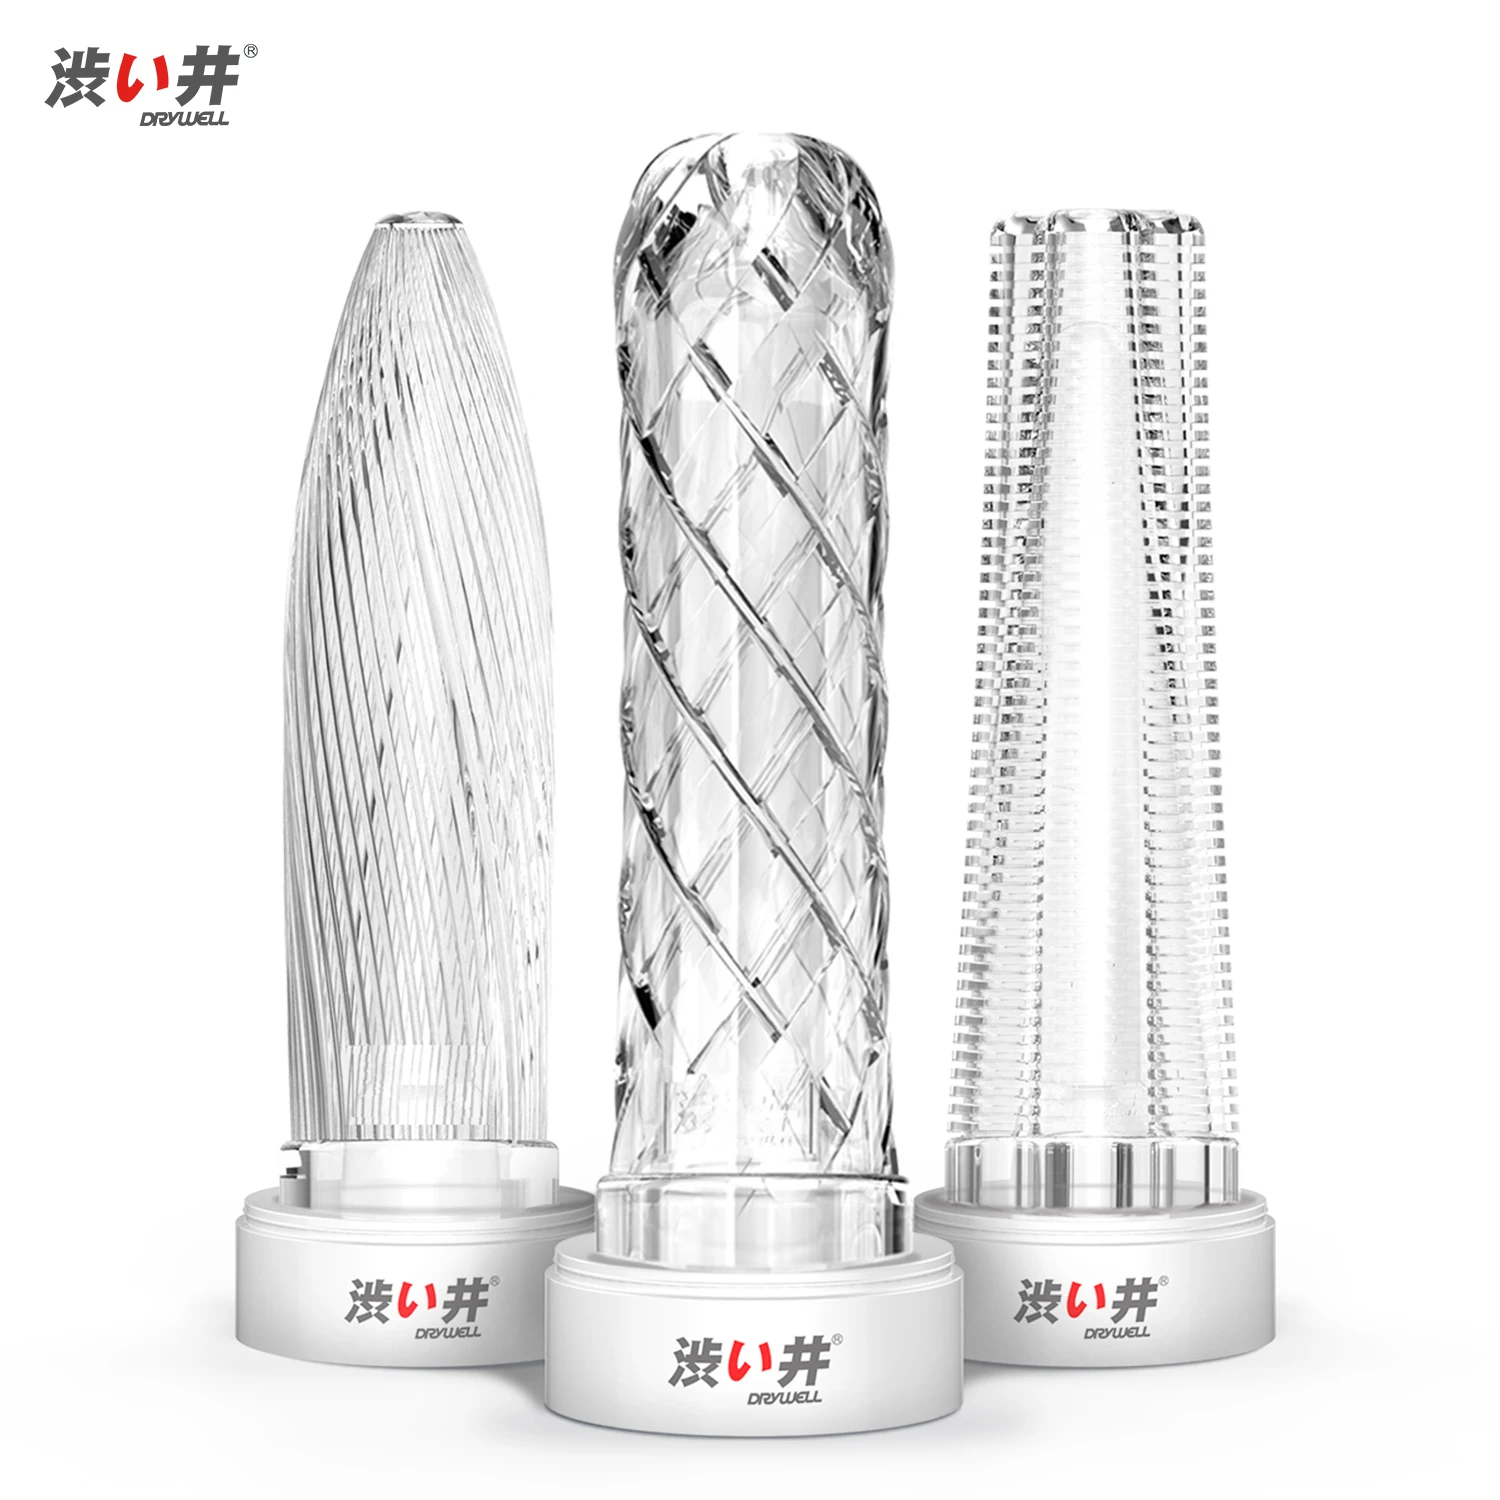 

DRY WELL 3pcs Condoms with Spikes Reusable Condoms Male Sleeve for Penis Extender Enlargement Cock Delay Sex Intimate Goods